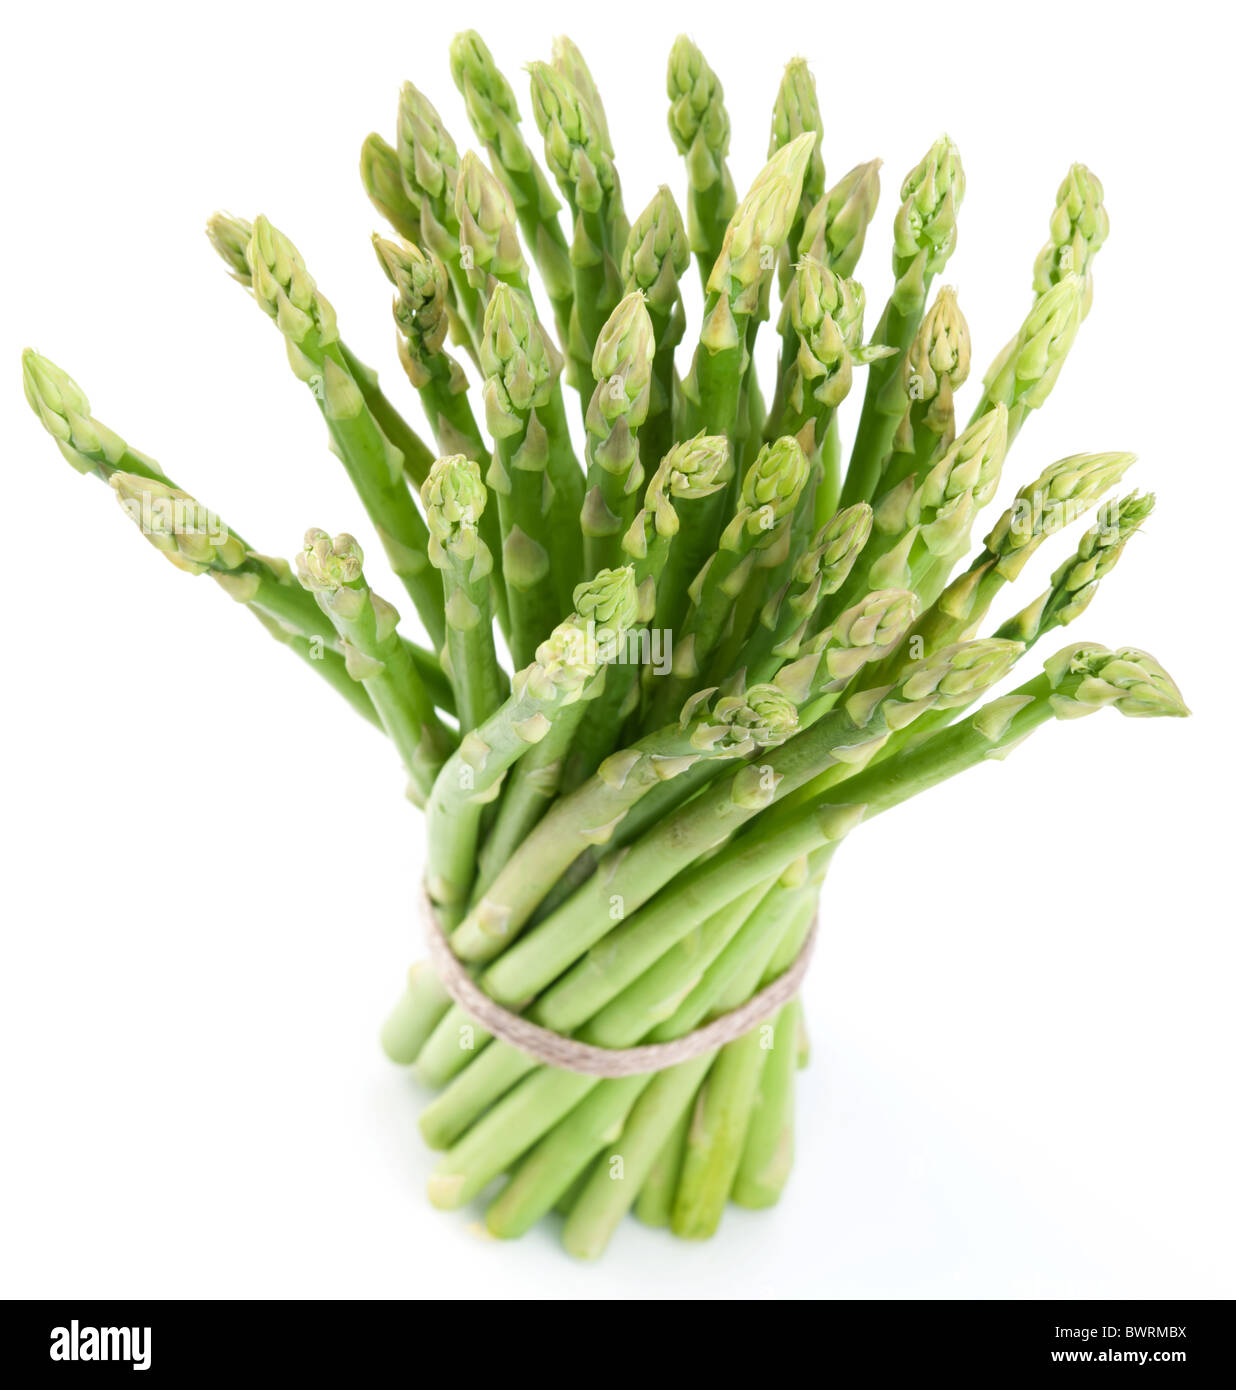 Sheaf of asparagus on a white background. Stock Photo